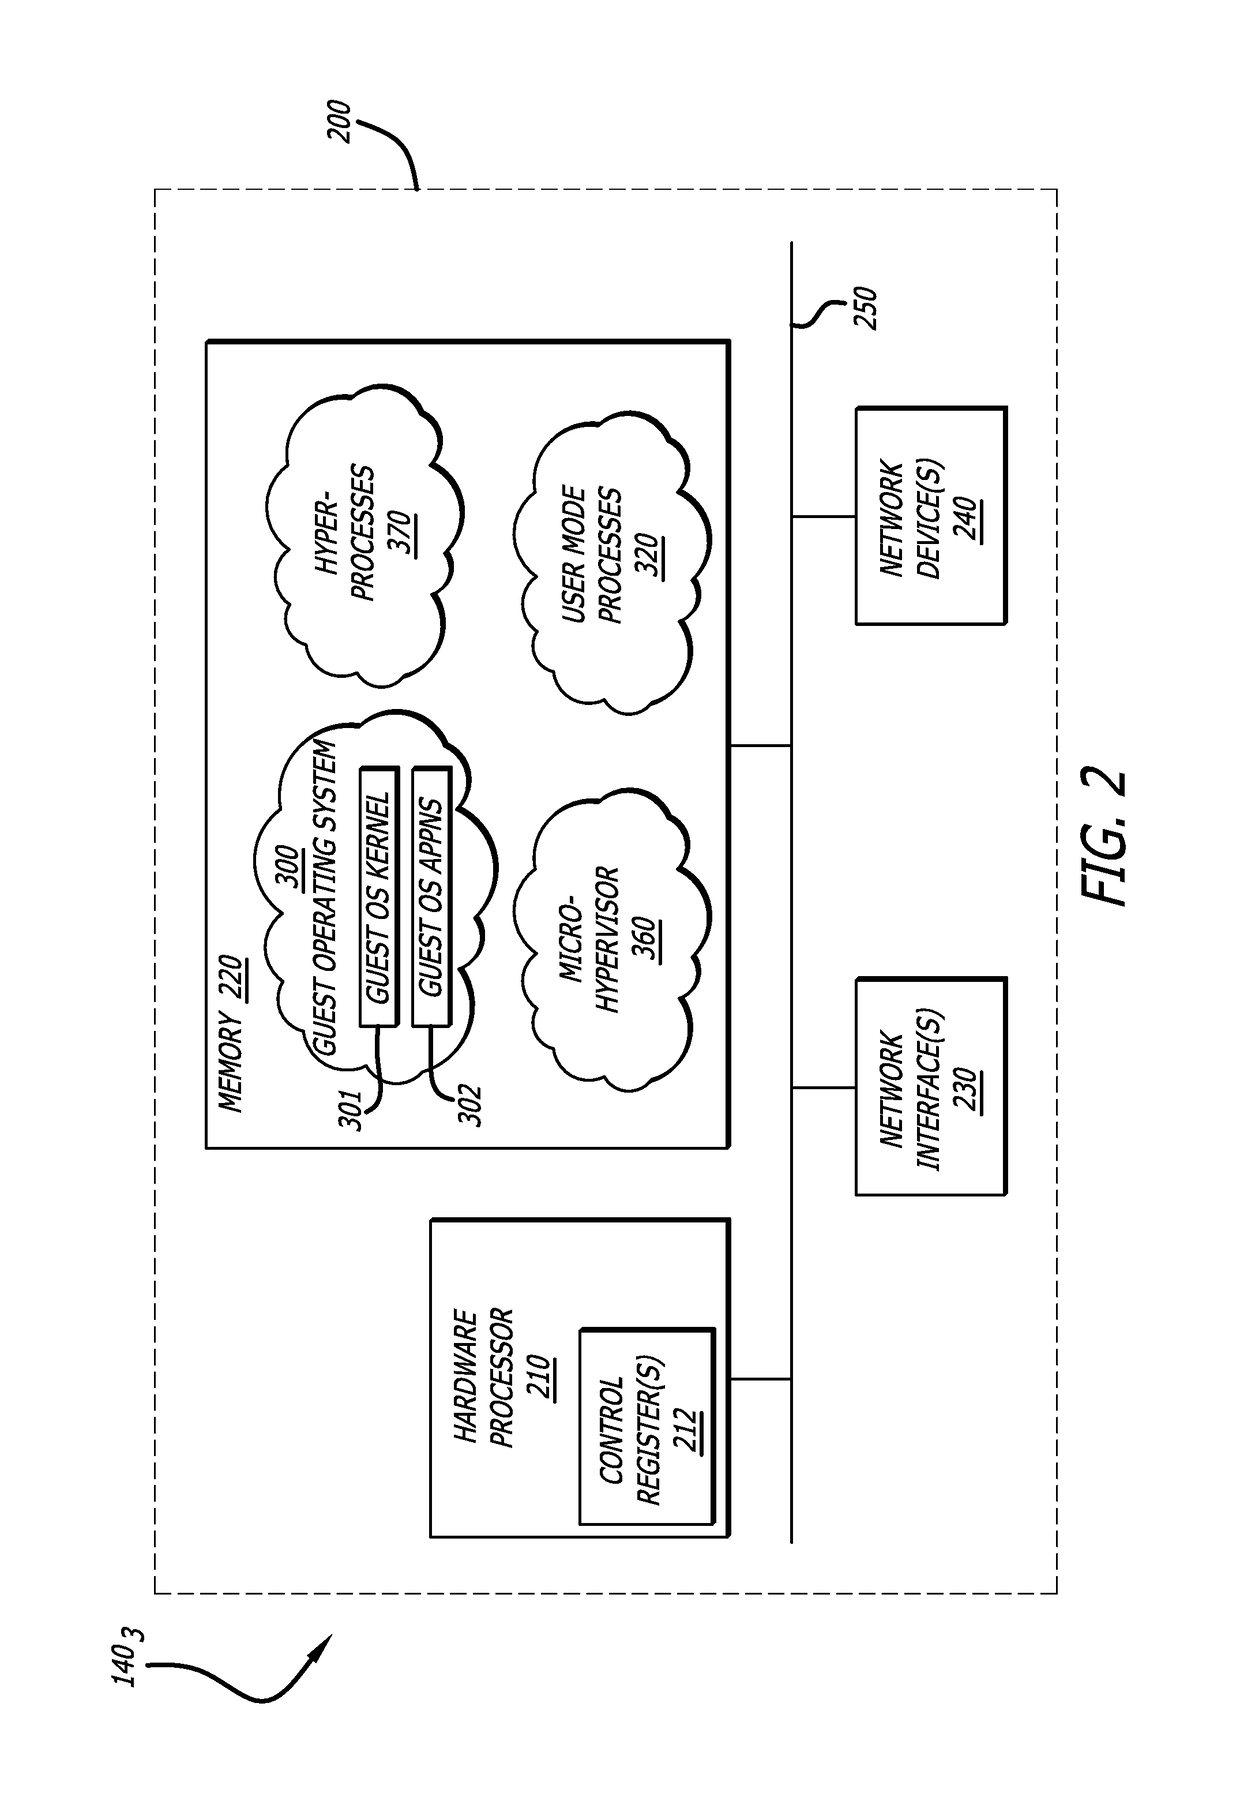 System and method for protecting memory pages associated with a process using a virtualization layer